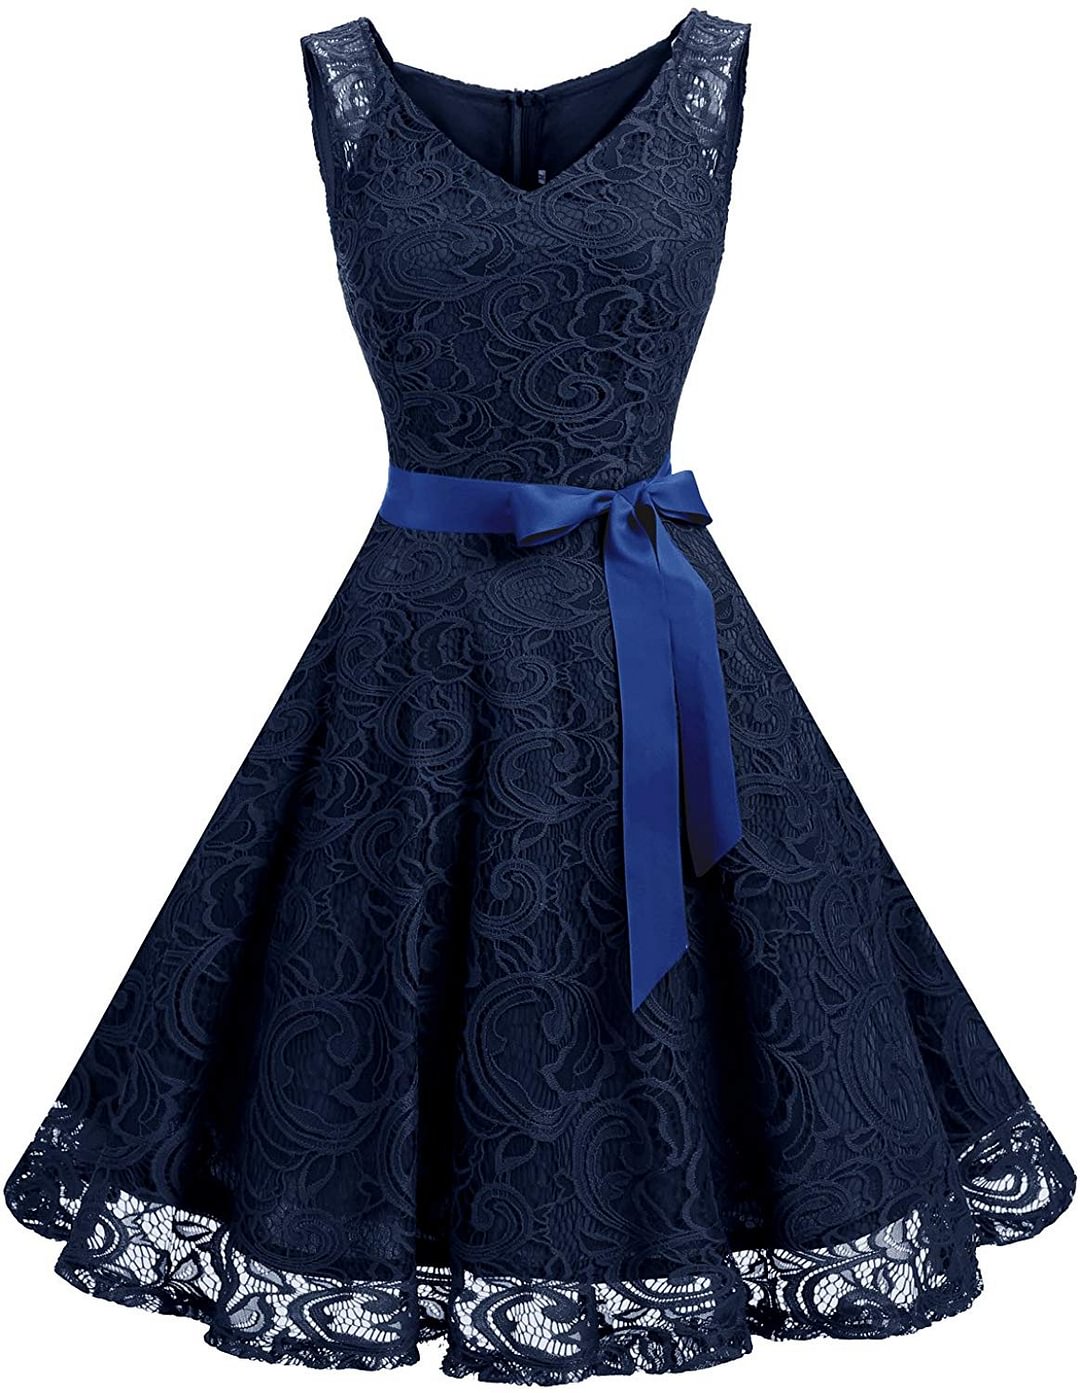 Floral Lace Bridesmaid Party Dress Short Prom Dress V Neck for women